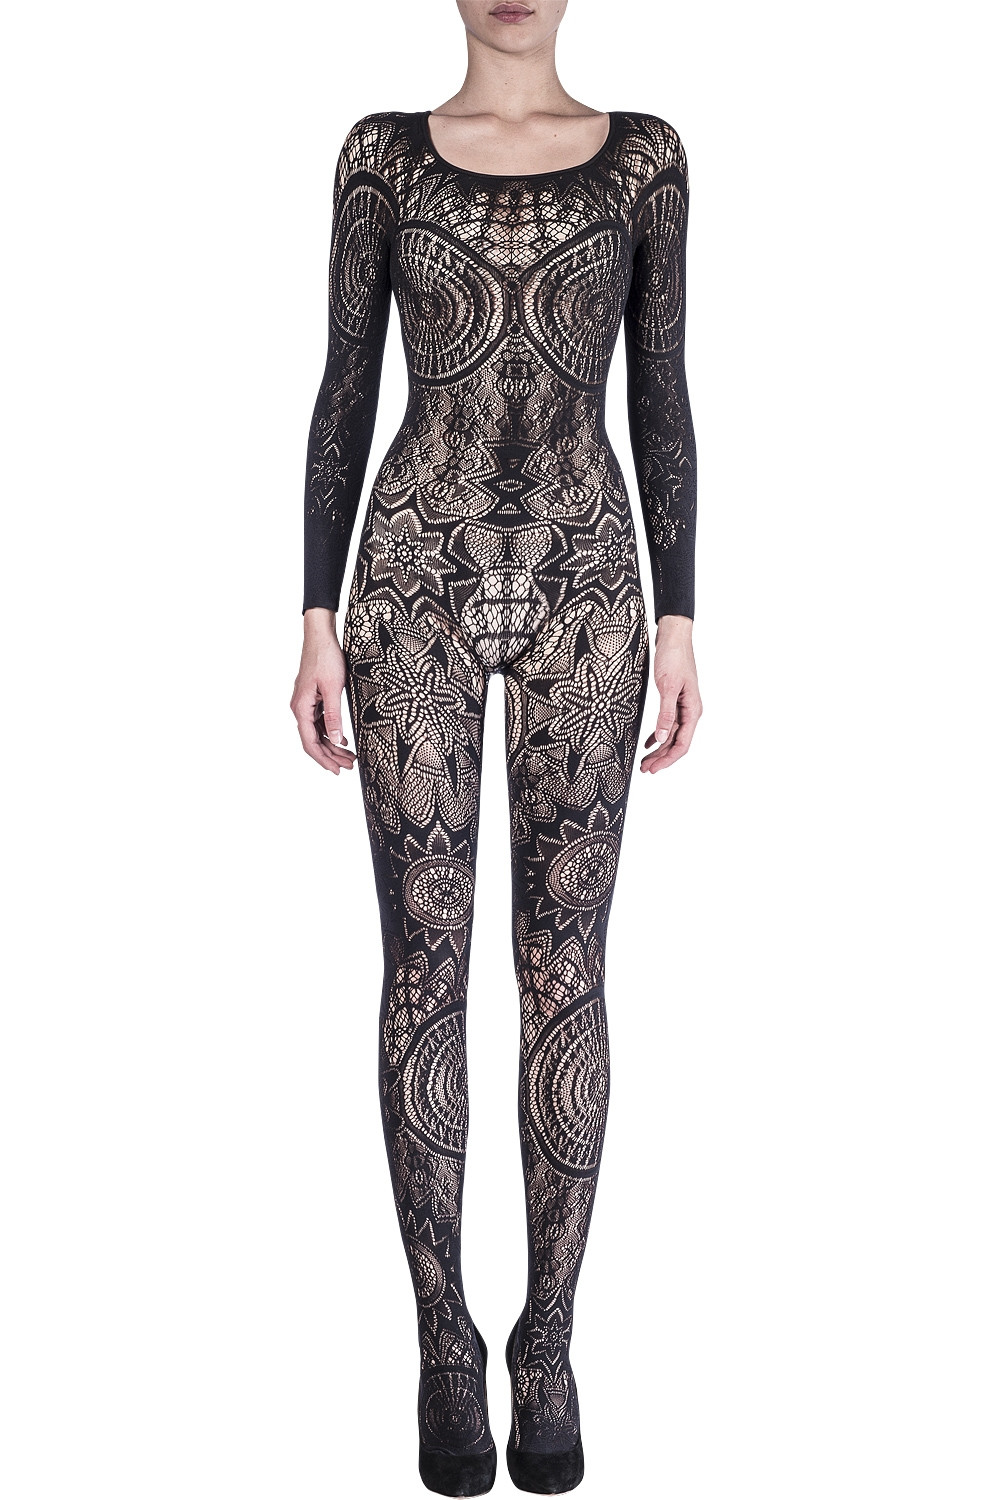 HYPNOTIC STYLE Full Body Catsuit, Black Catsuit, Mesh Costume, Fake Tattoo  Costume, Festival Clothing, Halloween Costume, Halloween Jumpsuit - Etsy